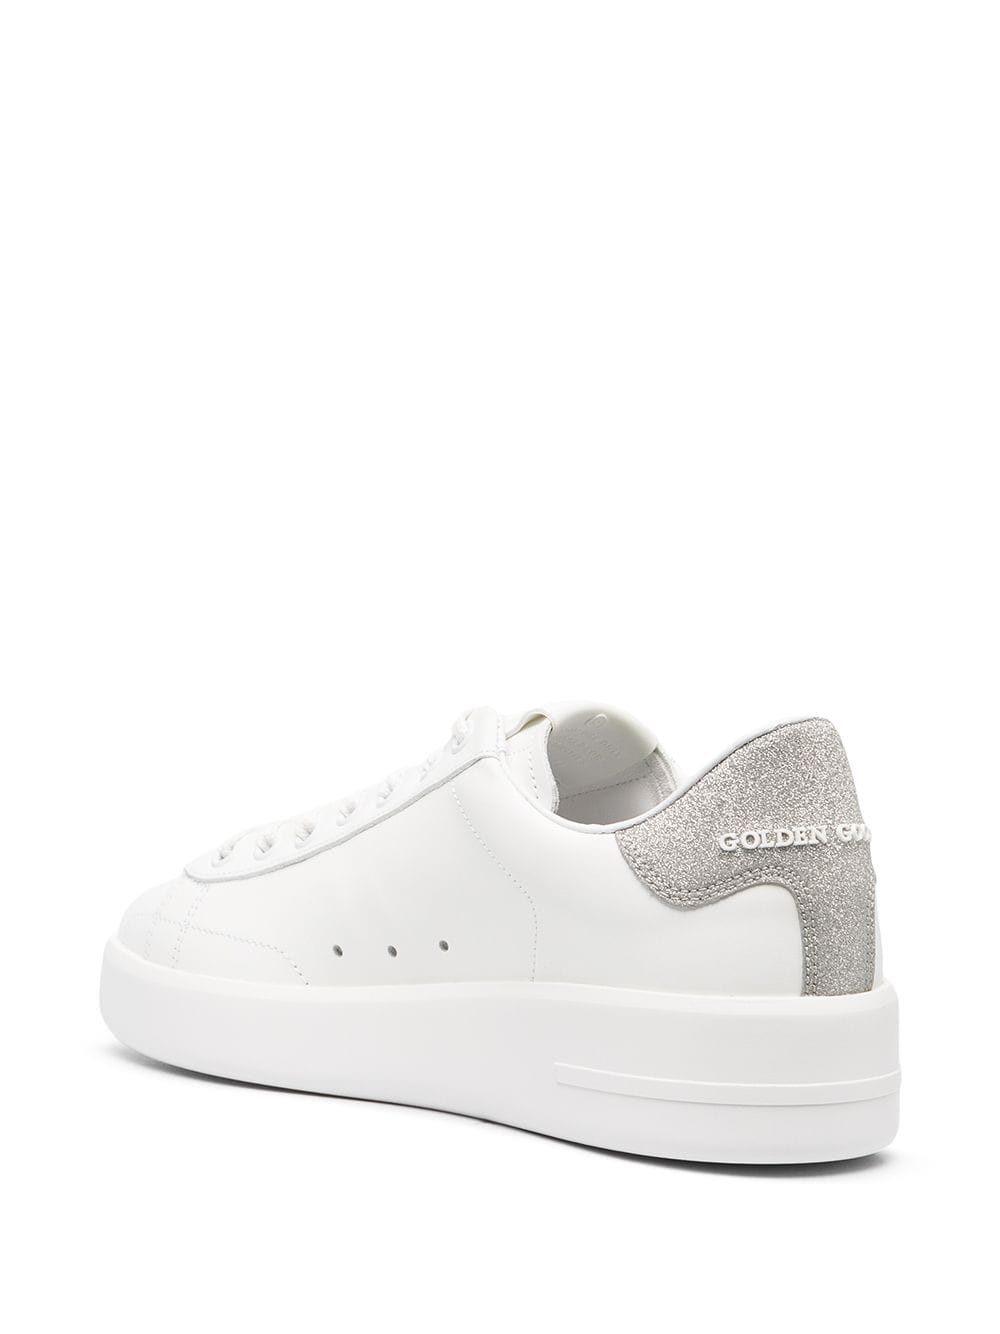 Purestar leather sneakers